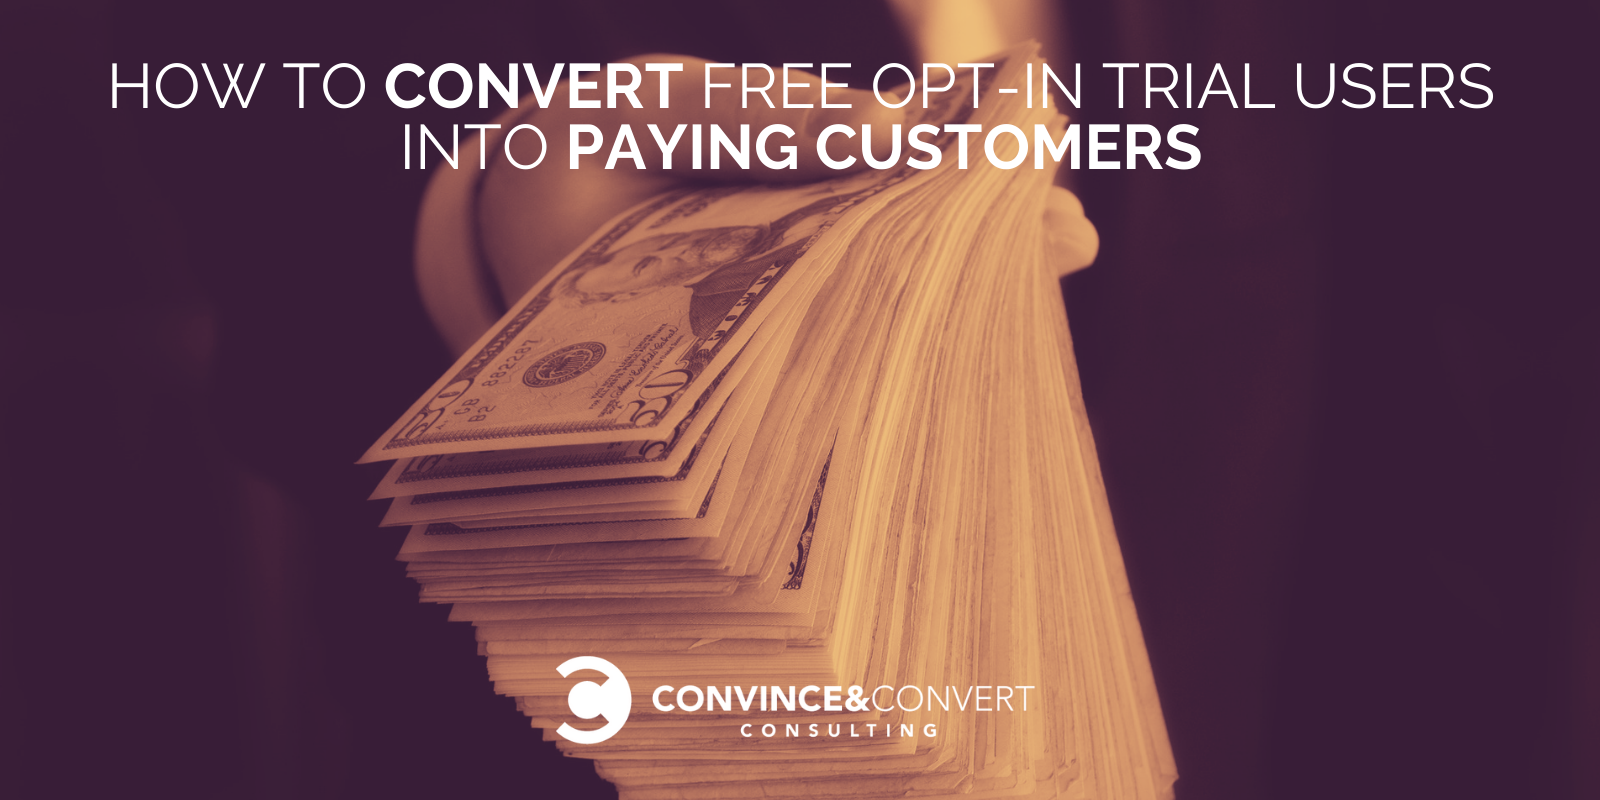 How to Convert Free Opt-in Trial Users into Paying Customers